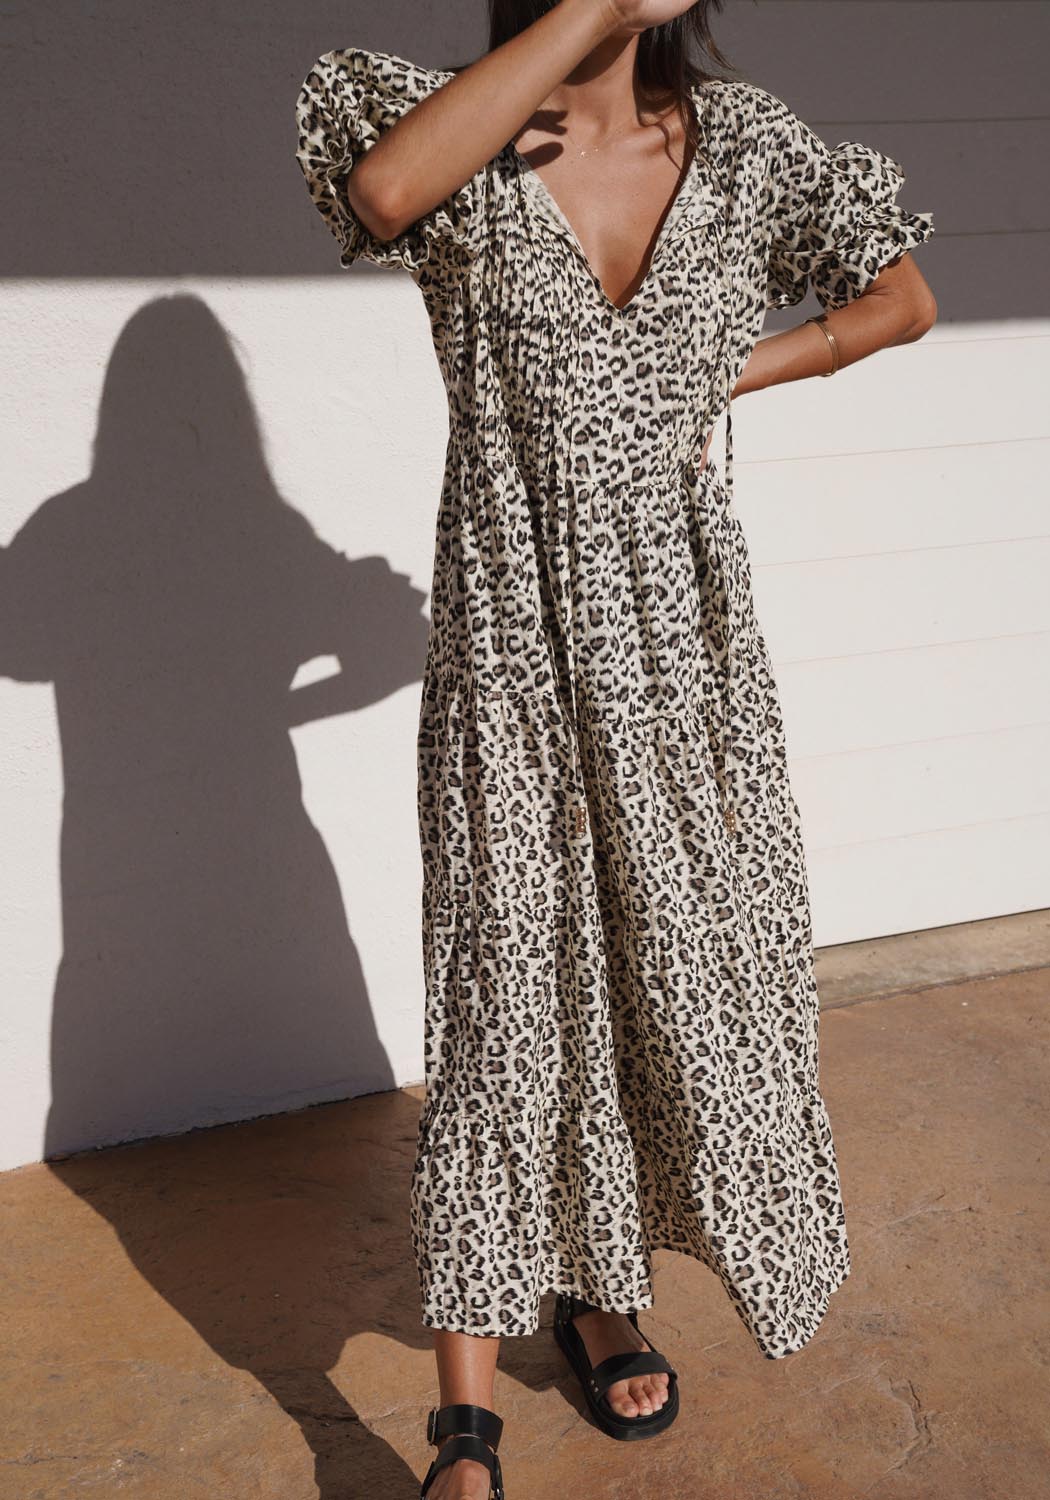 Our leopard obsession continues….